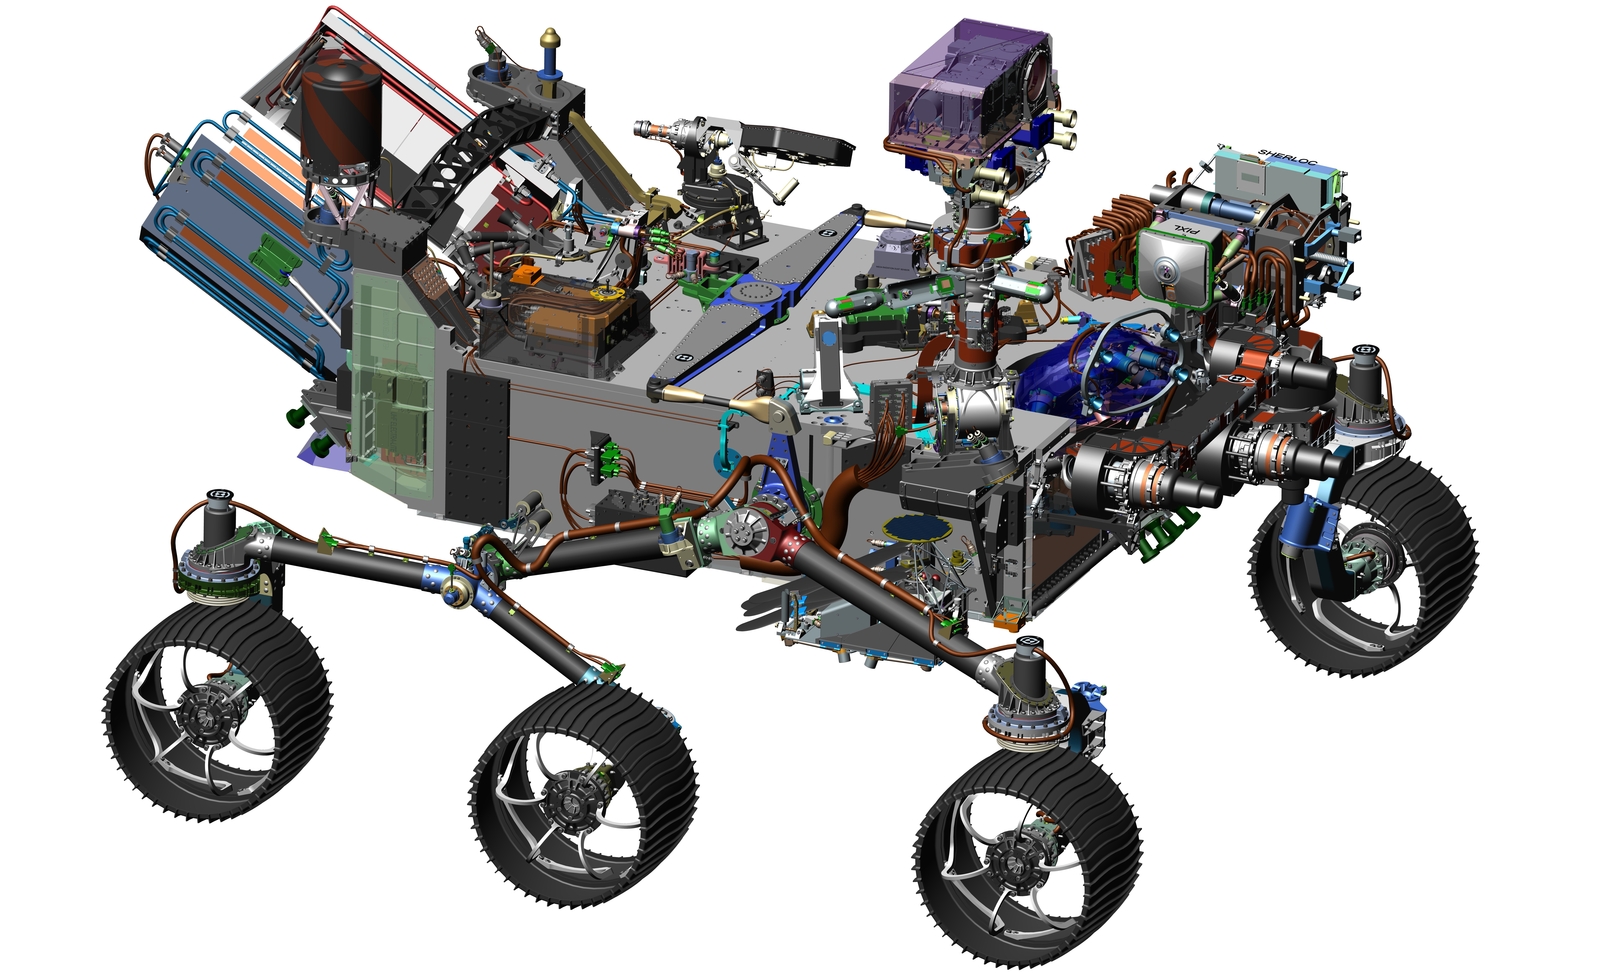 This 2016 image comes from computer-assisted-design work on NASA's 2020 Mars rover. The design leverages many successful features of NASA's Curiosity rover, which landed on Mars in 2012, but it adds new science instruments and a sampling system to carry out the new goals for the 2020 mission